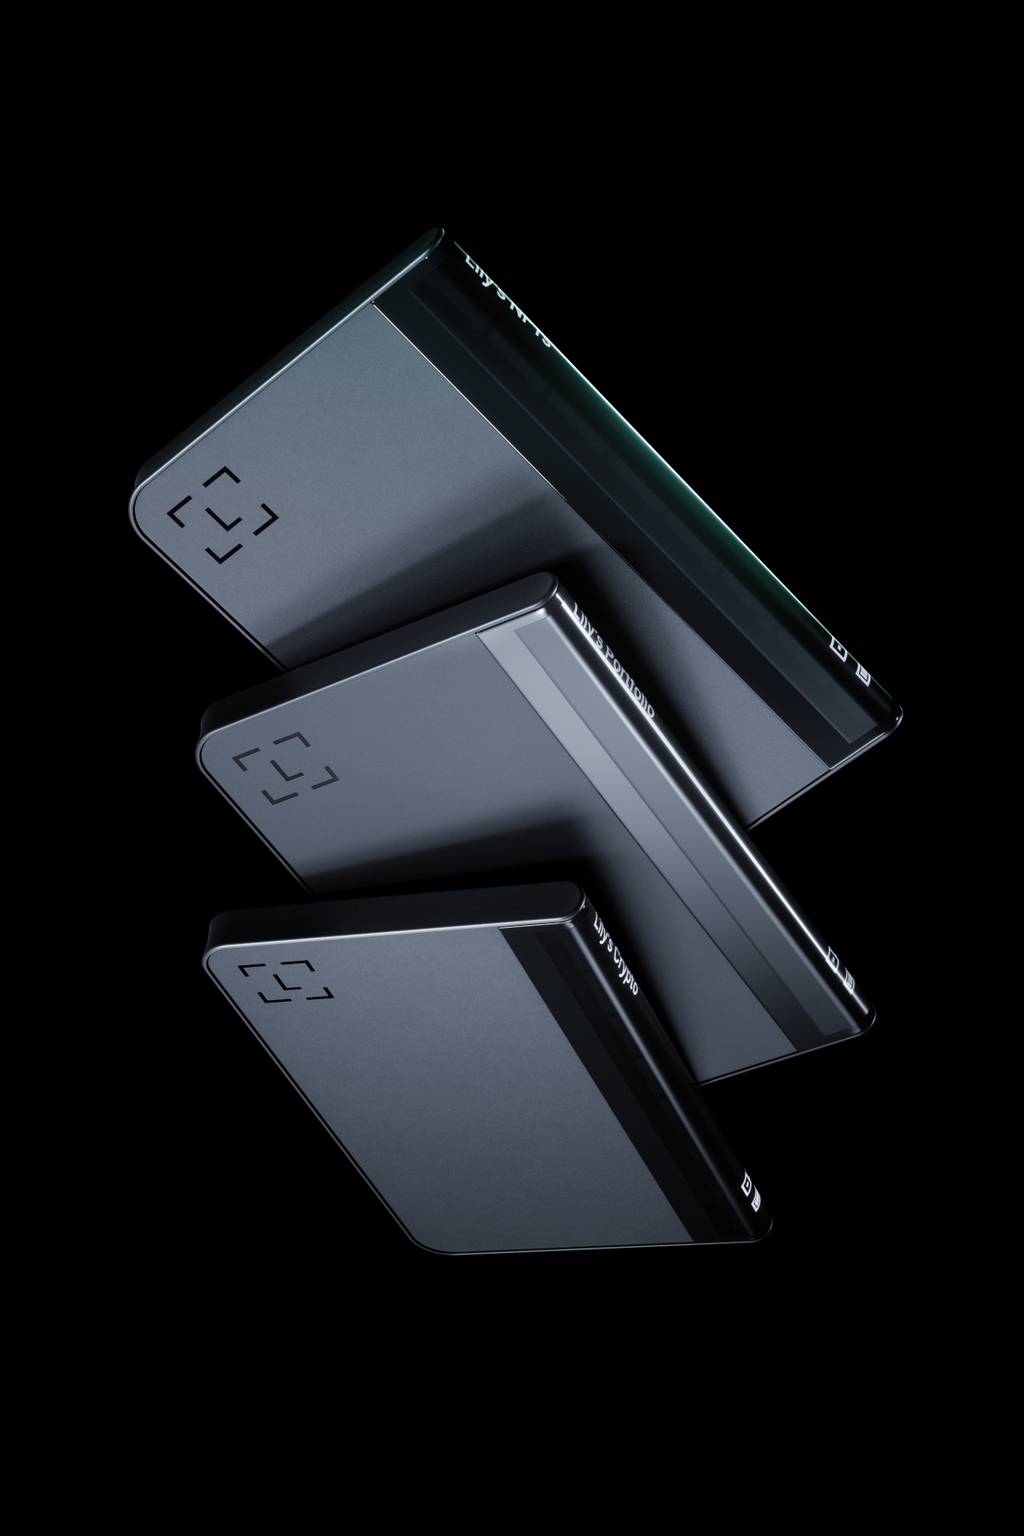 A product photo shows three Ledger Stax devices against a black background.